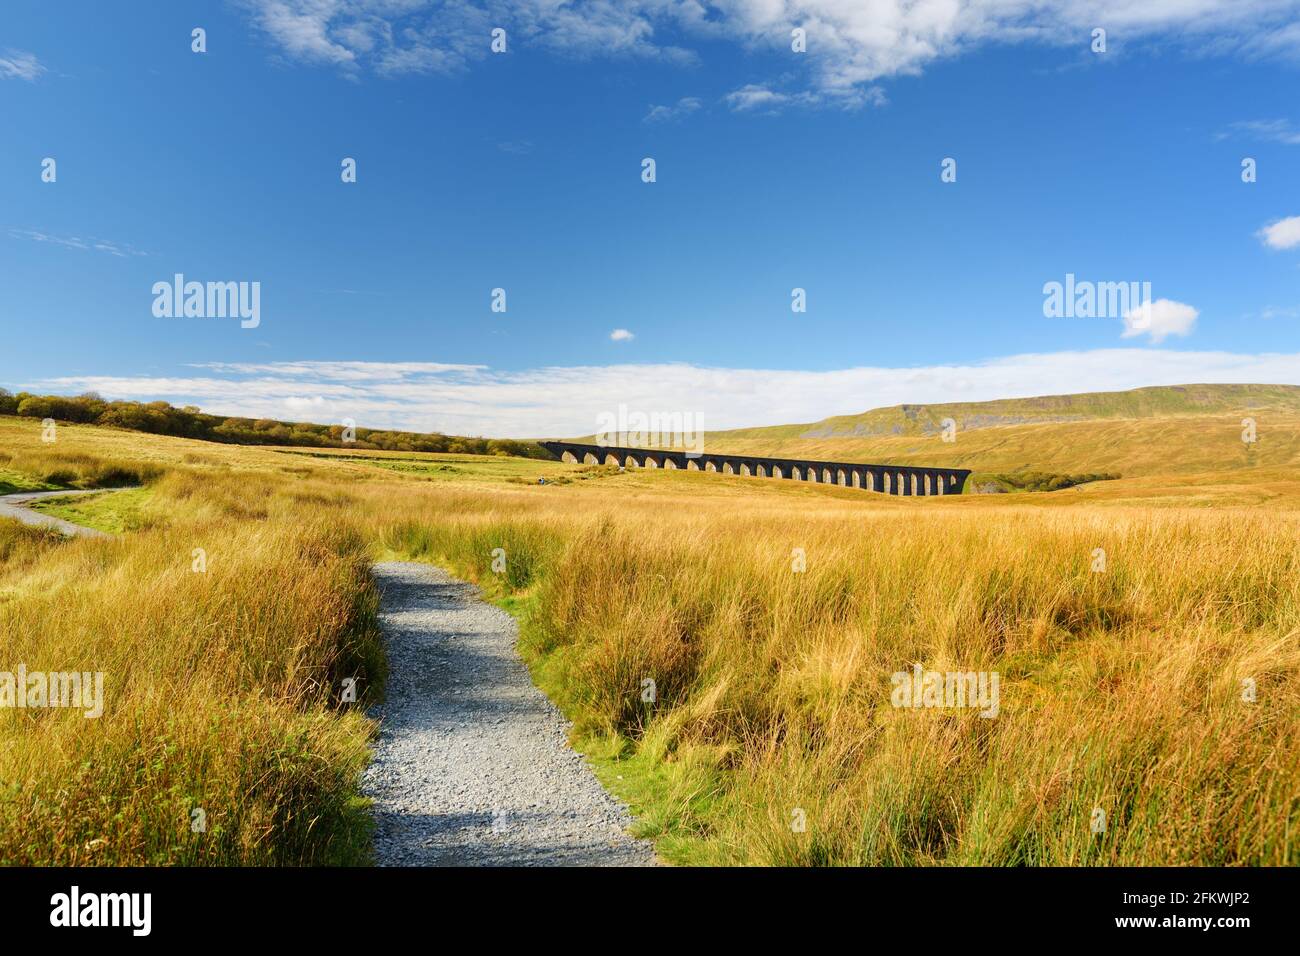 Ribblehead viaduct, located in North Yorkshire, the longest and the third tallest structure on the Settle-Carlisle line. Tourist attractions in Yorksh Stock Photo